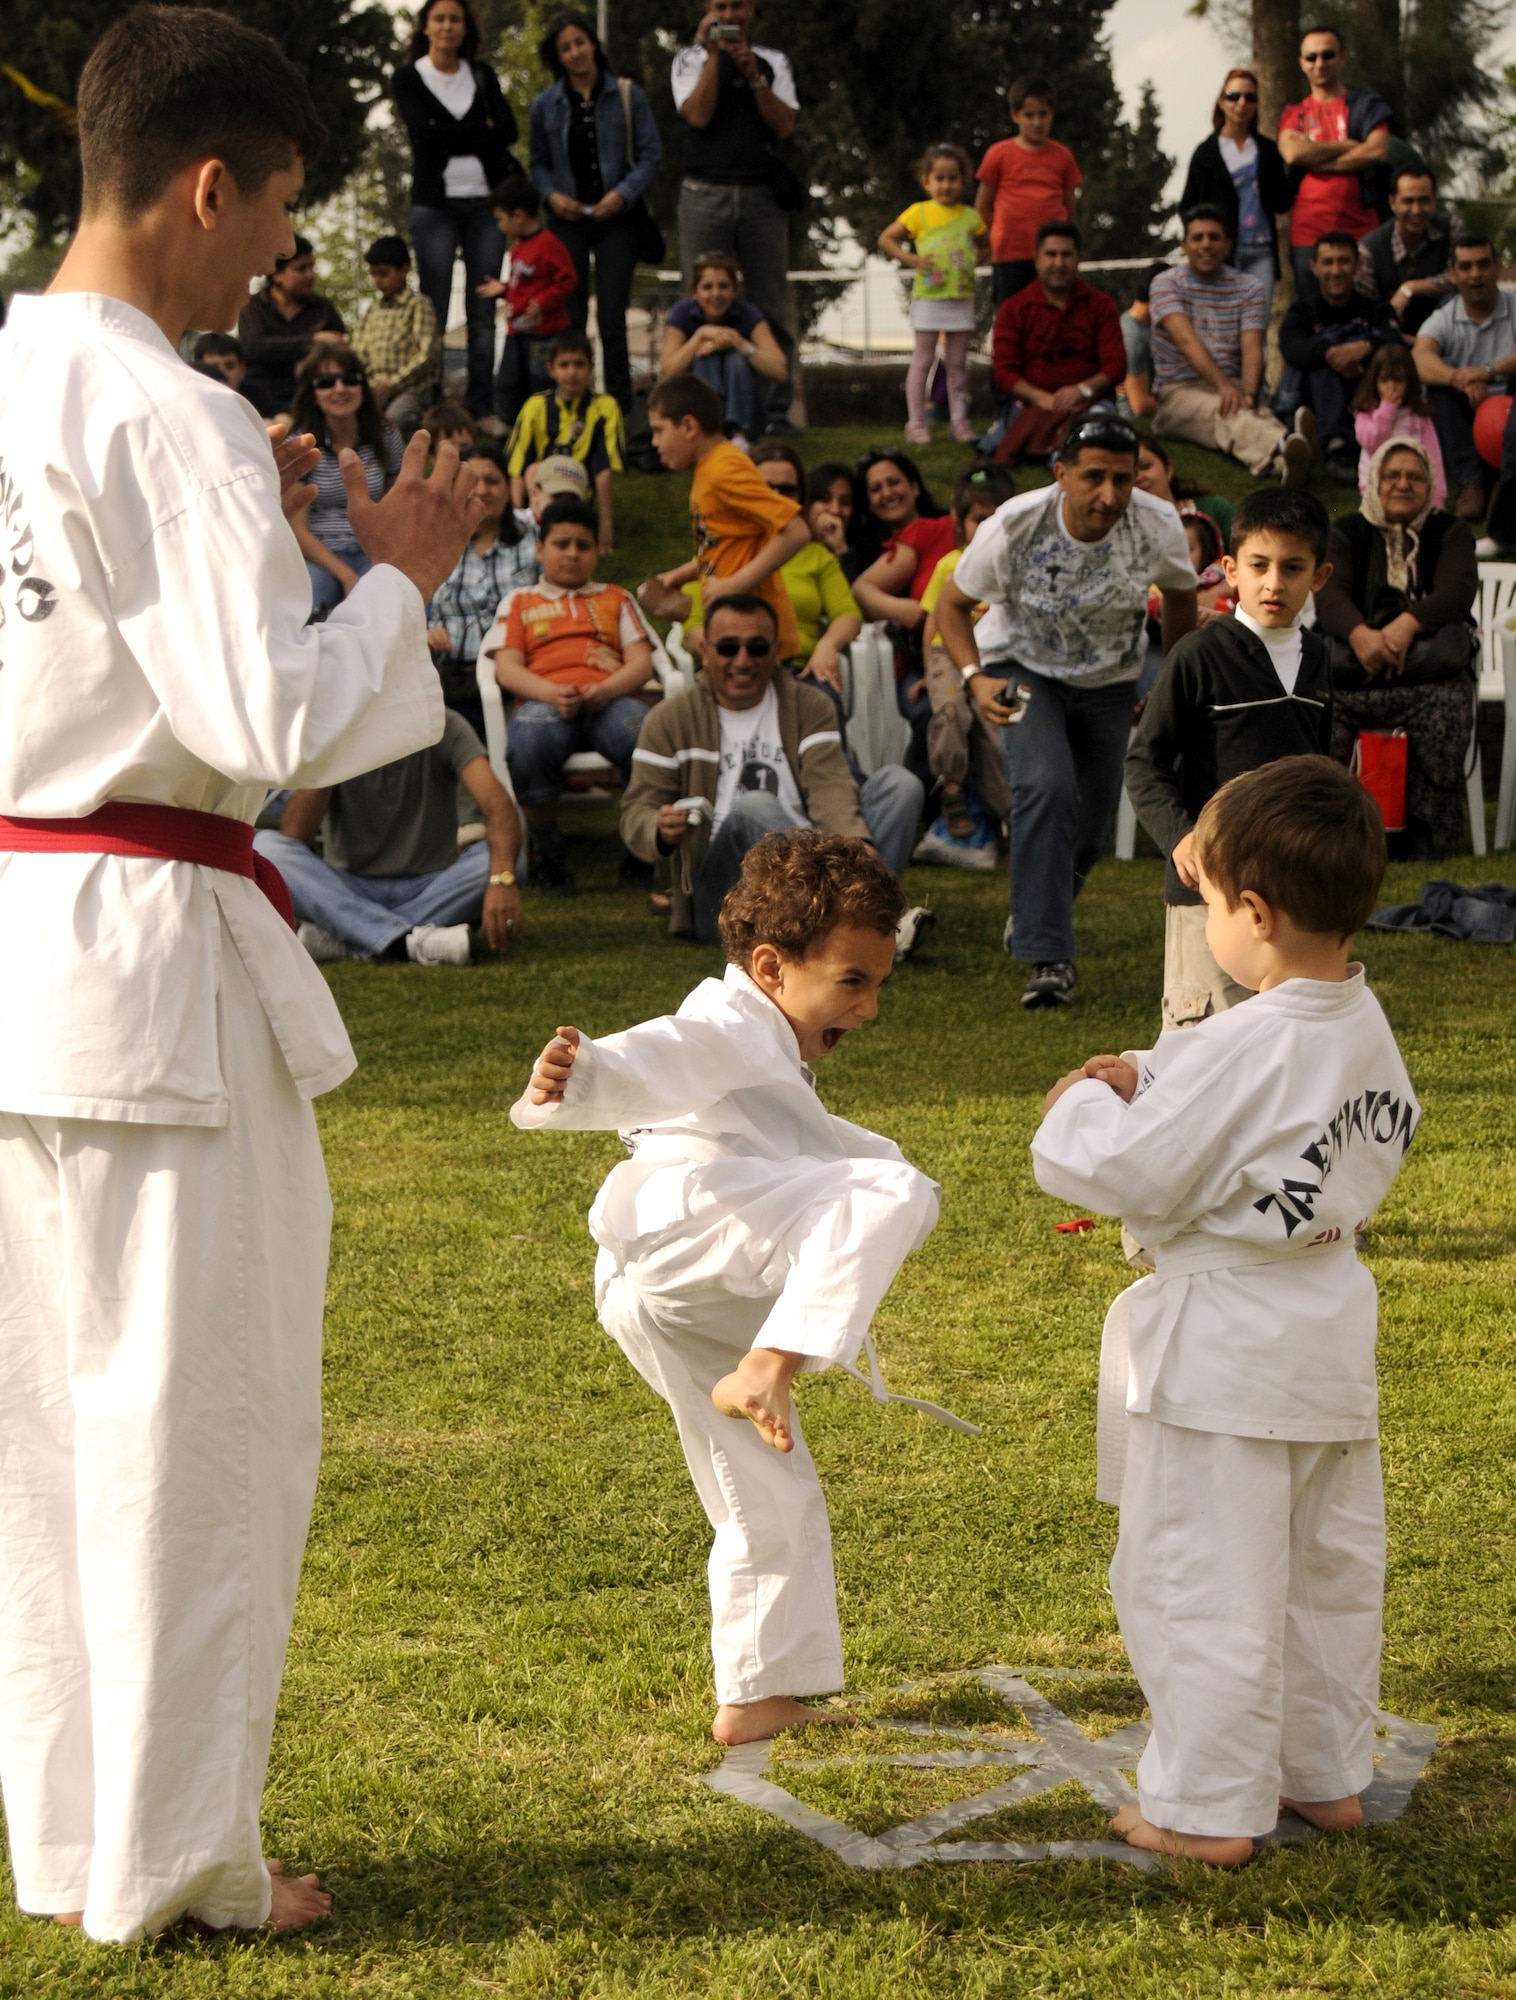 A young Turkish Tae Kwon Do instructor stands by as beginning students perform moves against the other during a demonstration at the Turkish Children’s Festival at Arkadas Park at Incirlik Air Base, Turkey. The day was celebrated with traditional folk dances, the Tae Kwon Do show, races and local Turkish food.  More than 200 people were in attendance to the festival, a mix of American and Turkish families from the base.  (U.S. Air Force photo/Amber Russell)